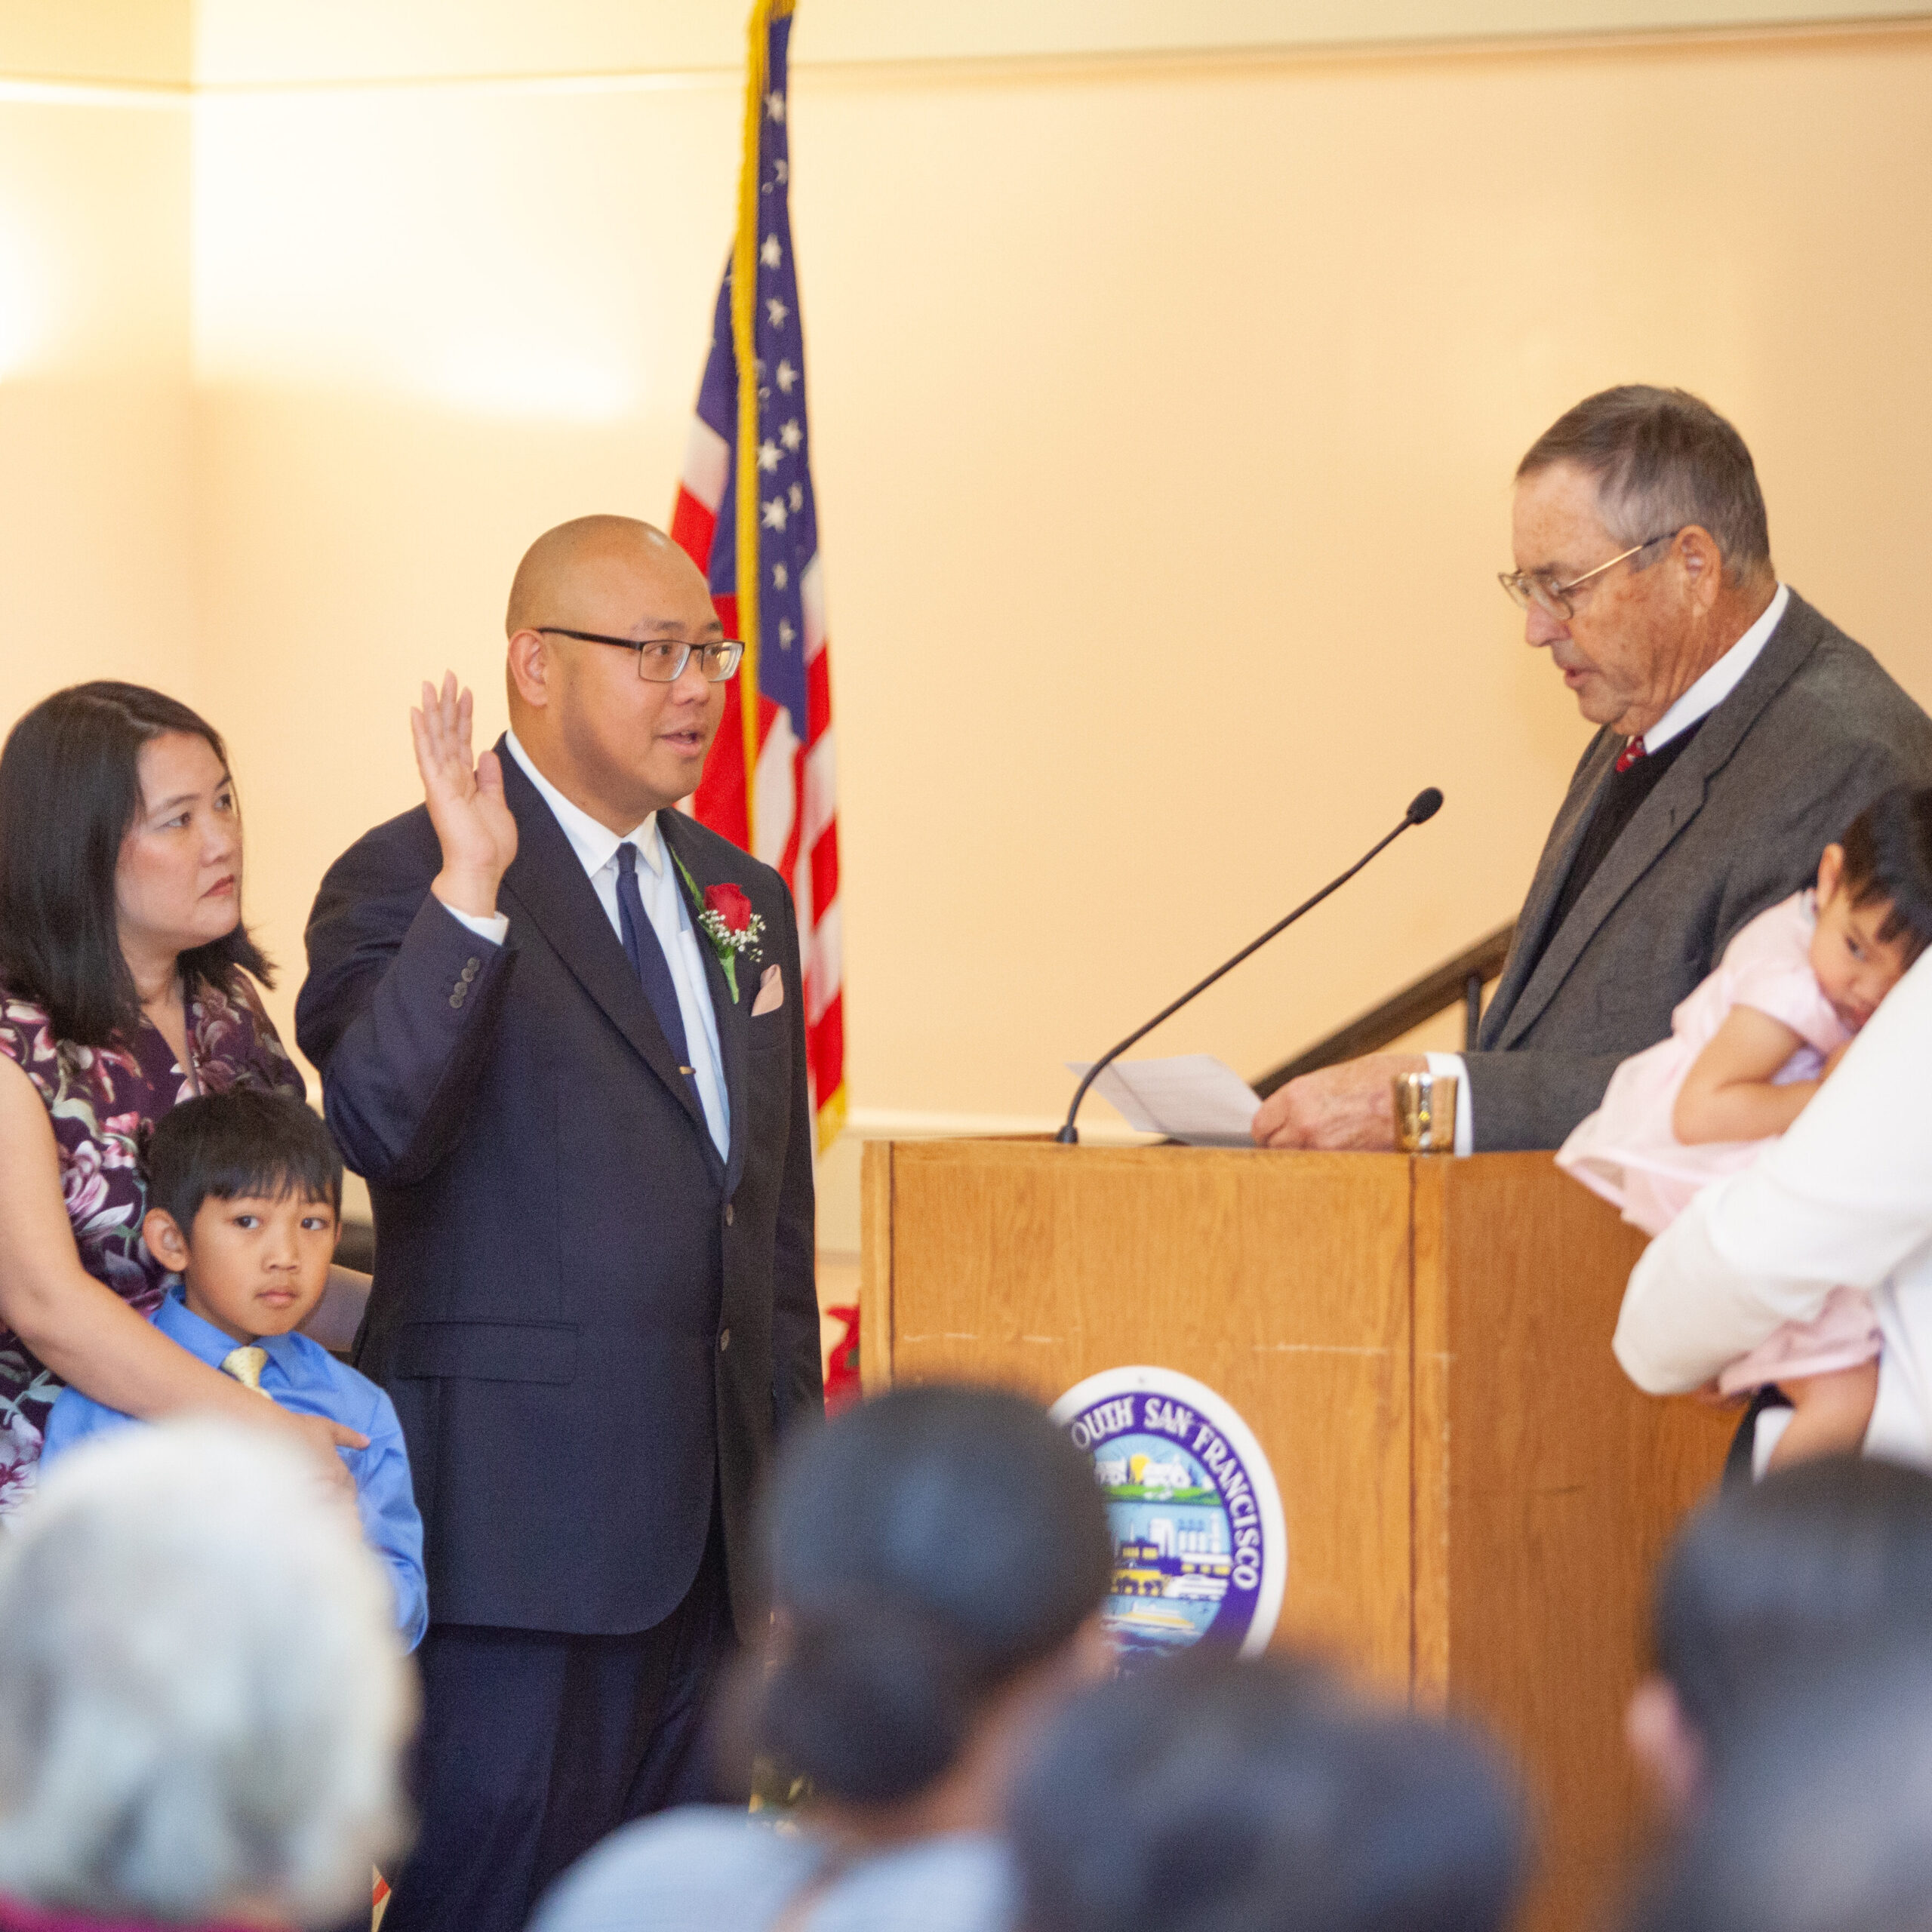 Mark Nagales is surrounded by his family as he is sworn in to the South San Francisco City Council by former Assemblymember Gene Mullin, 2018.